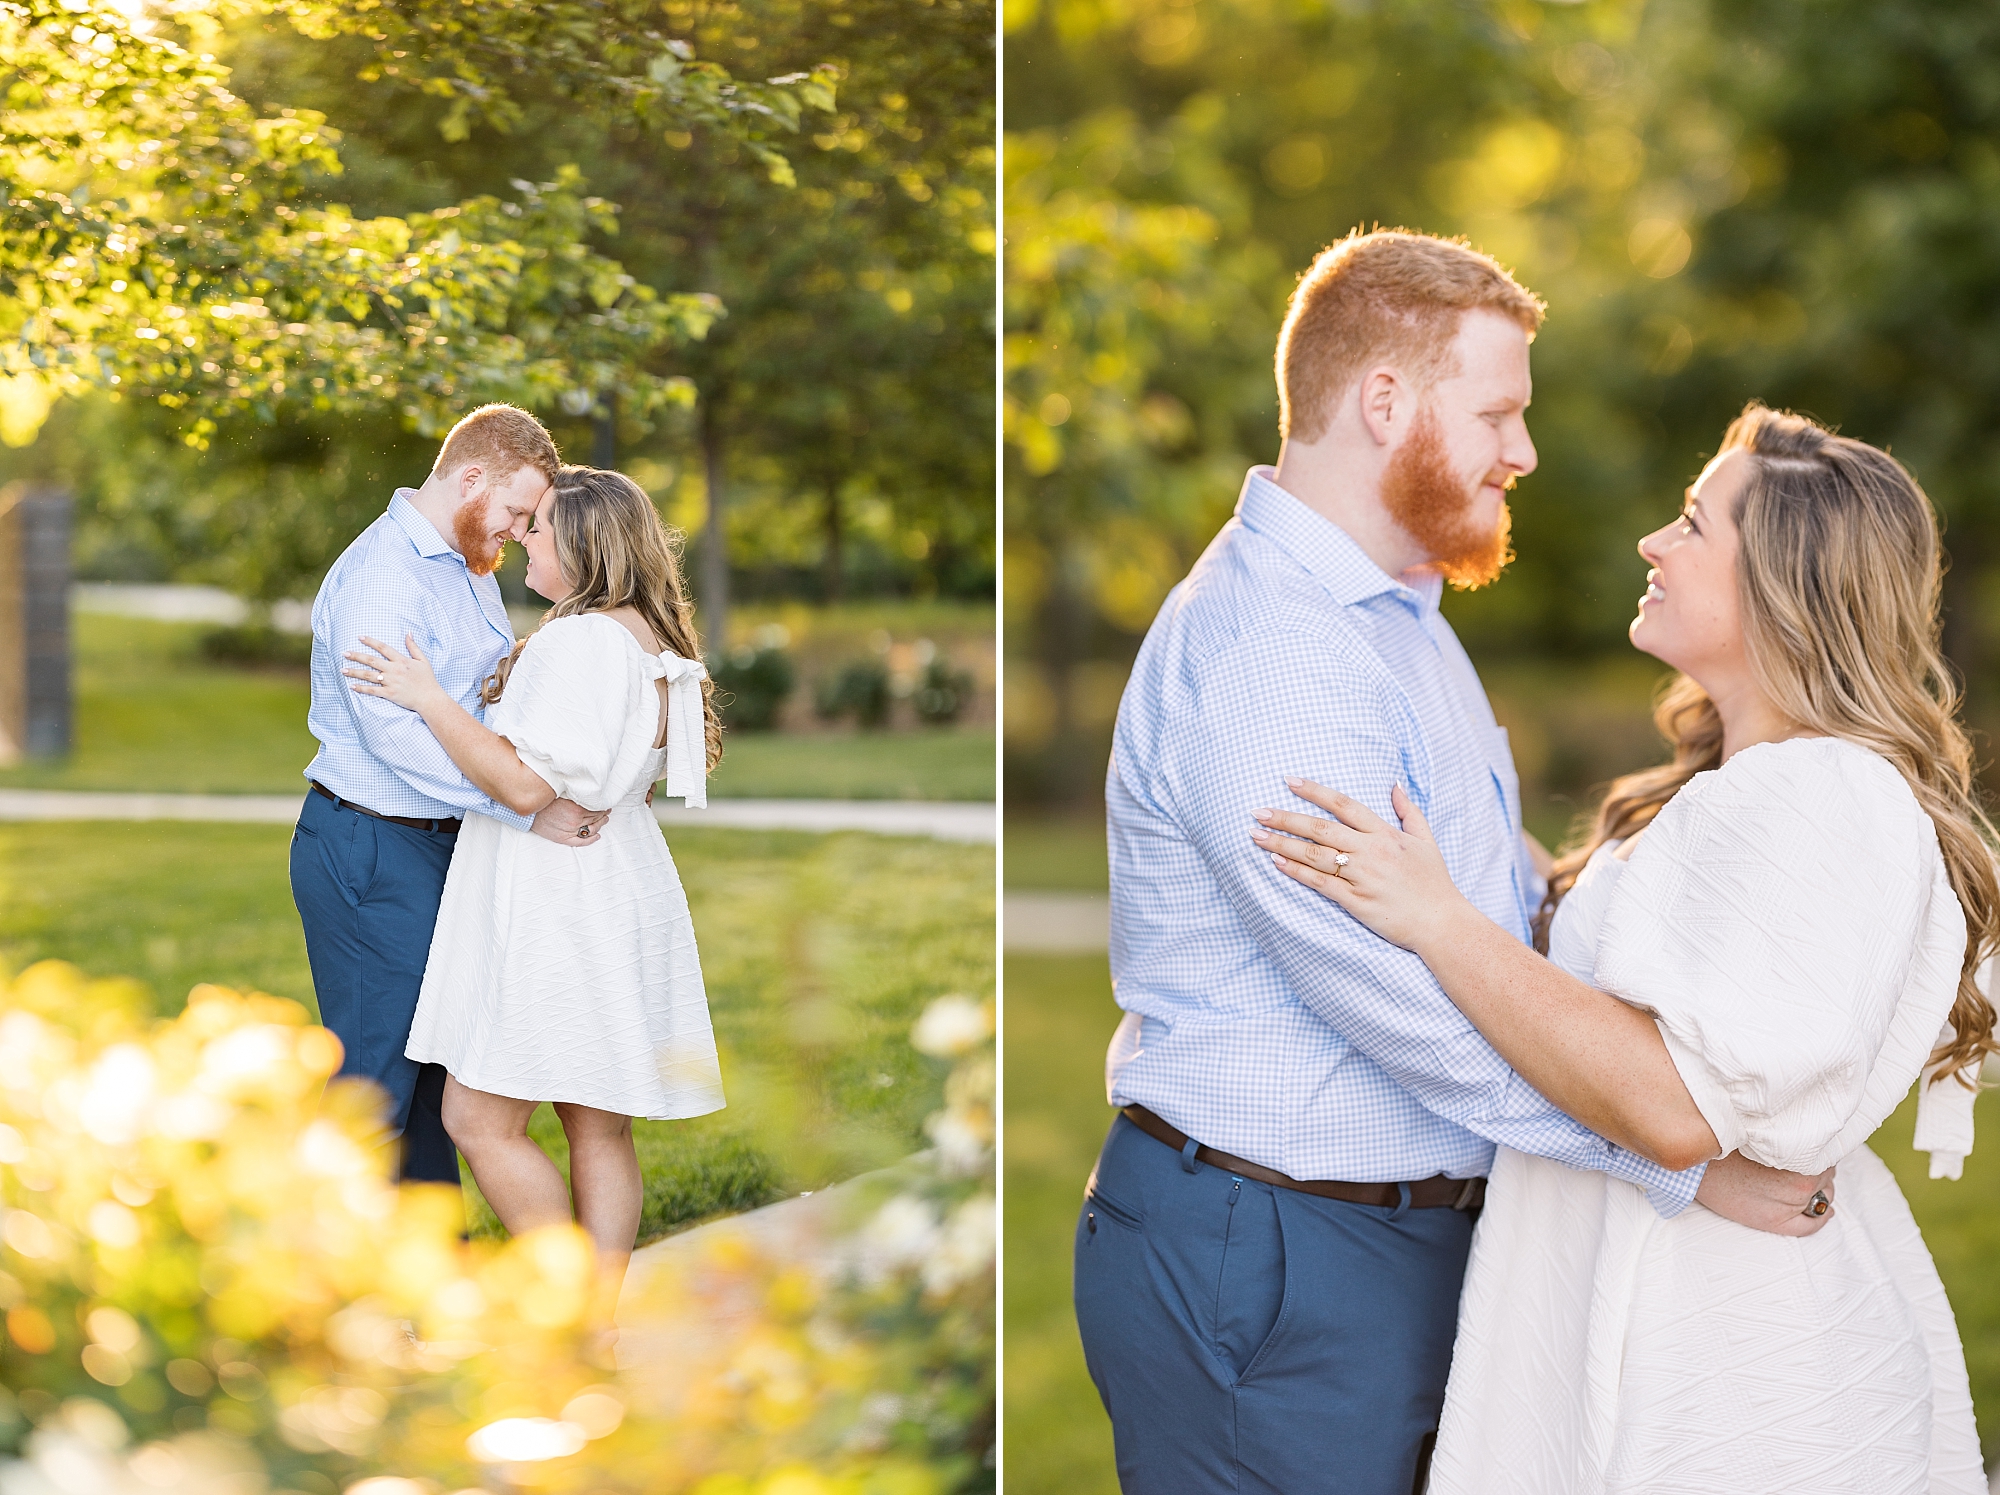 Engagement photos at Golden Hour | Raleigh NC Engagement Photographer